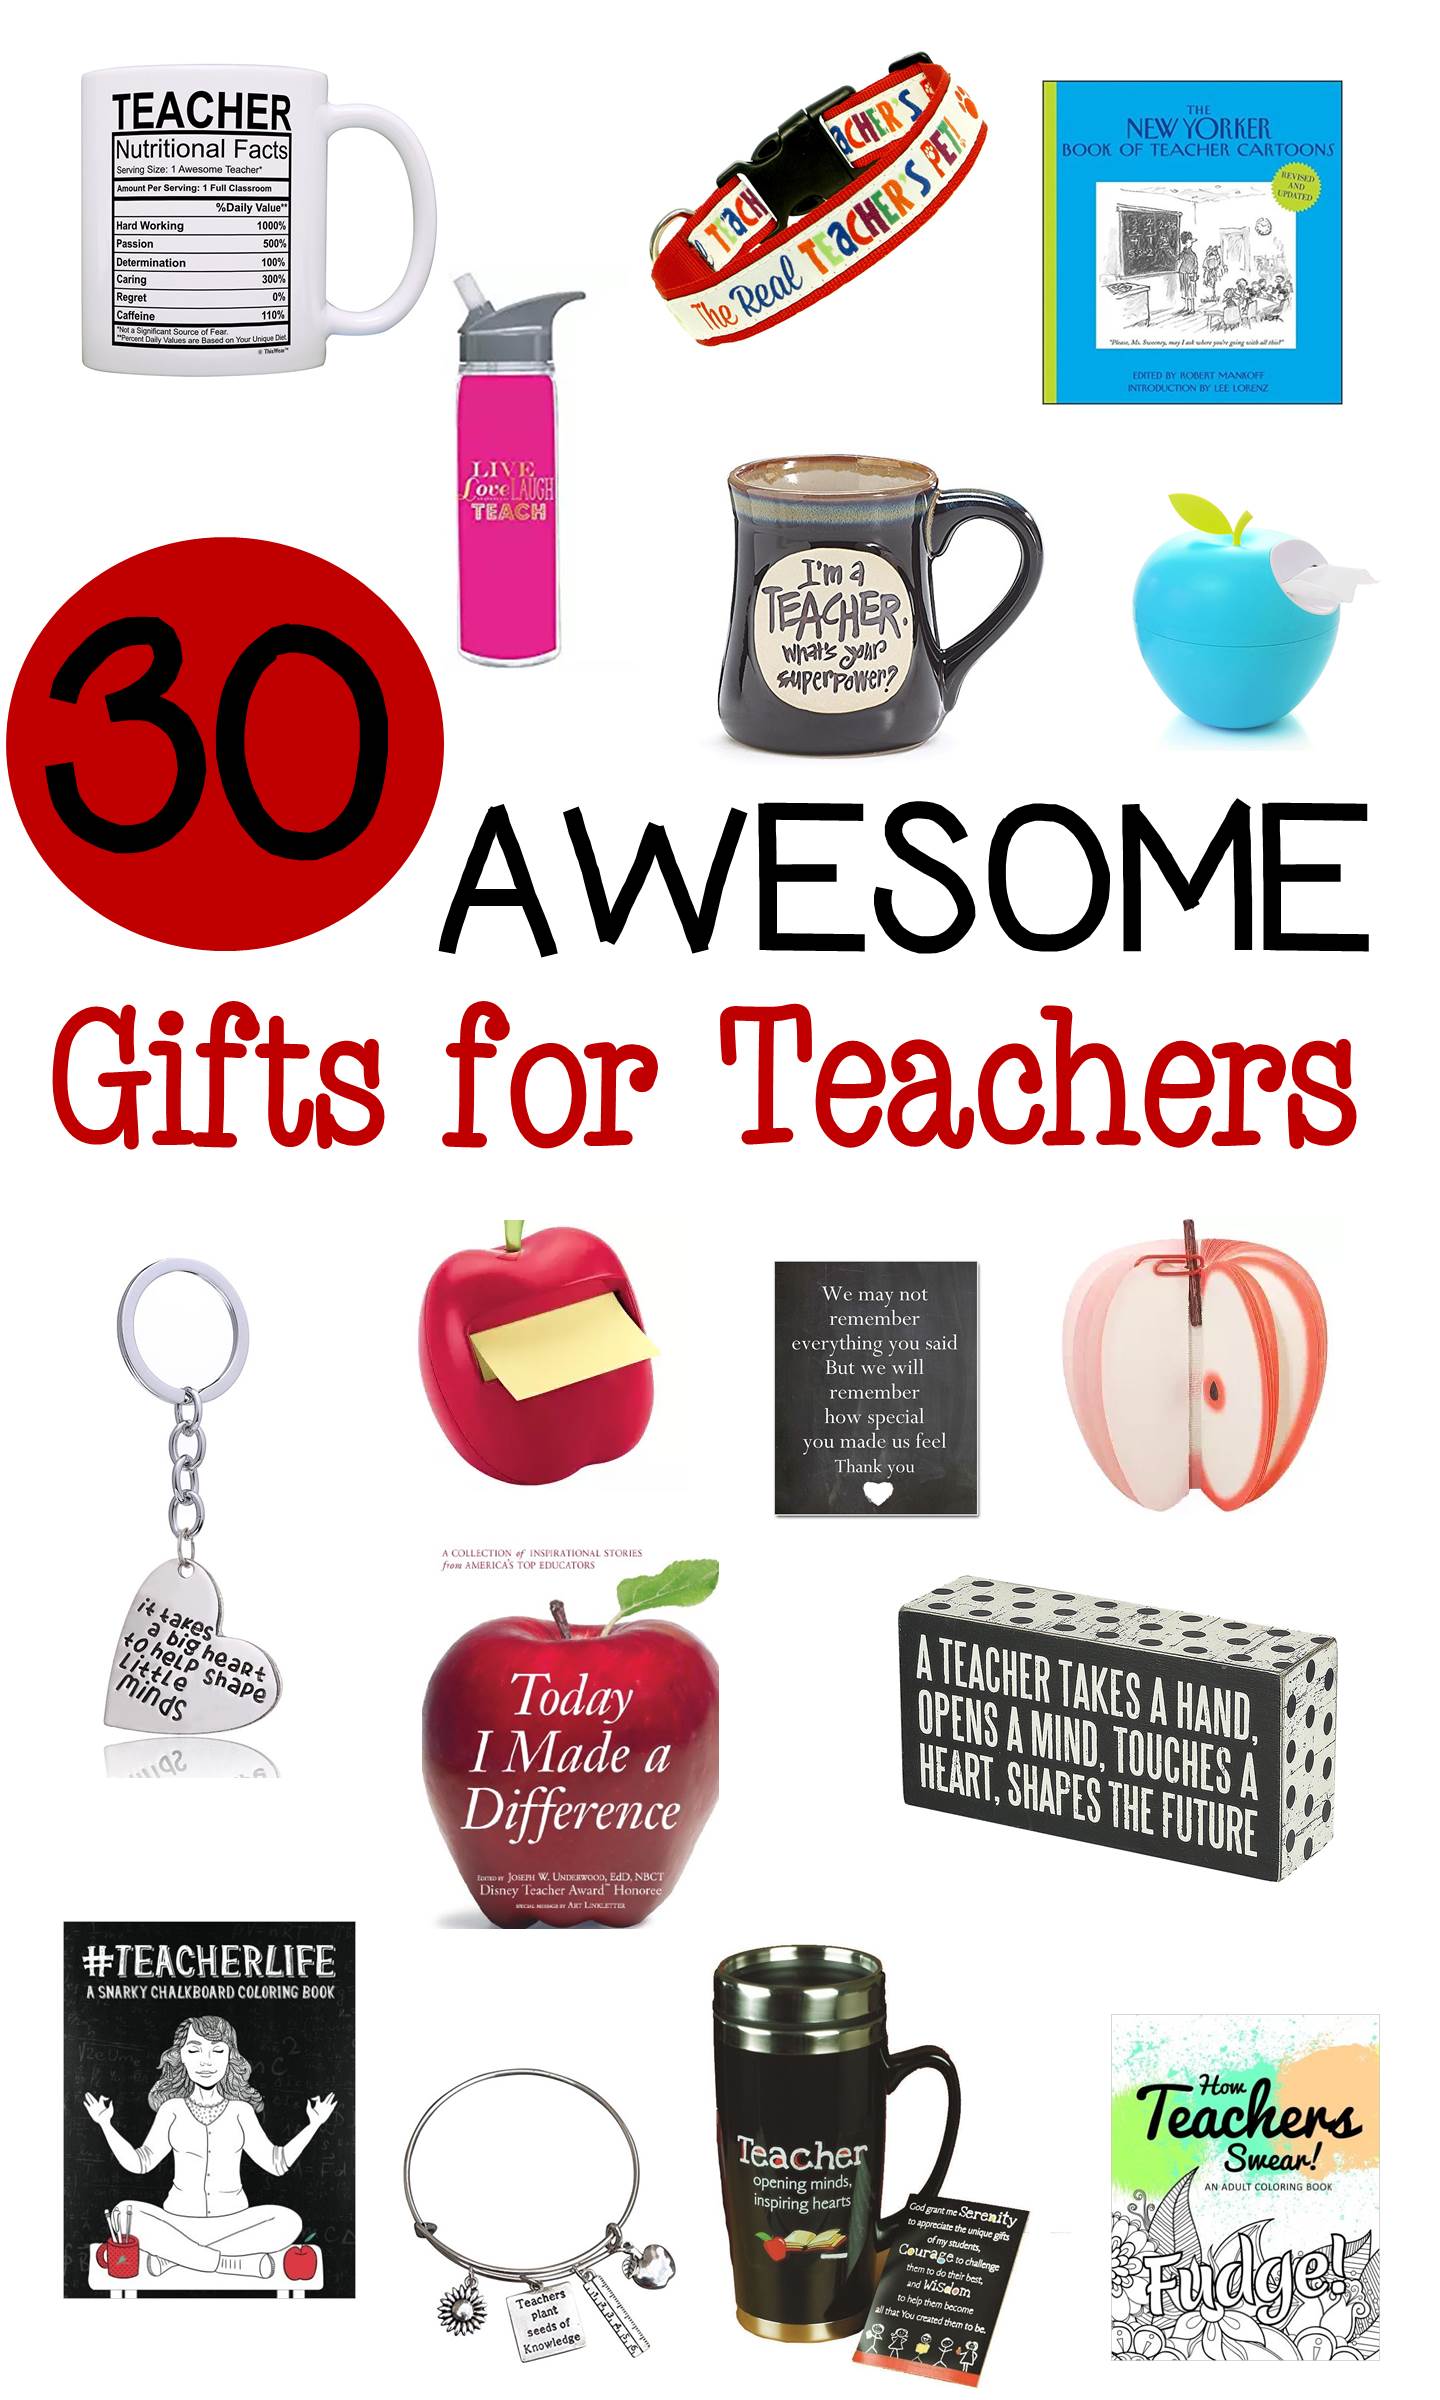 Whether you are looking for Christmas gifts for teachers, Back to School gifts for teachers, or anytime gifts, there are great things in this list!